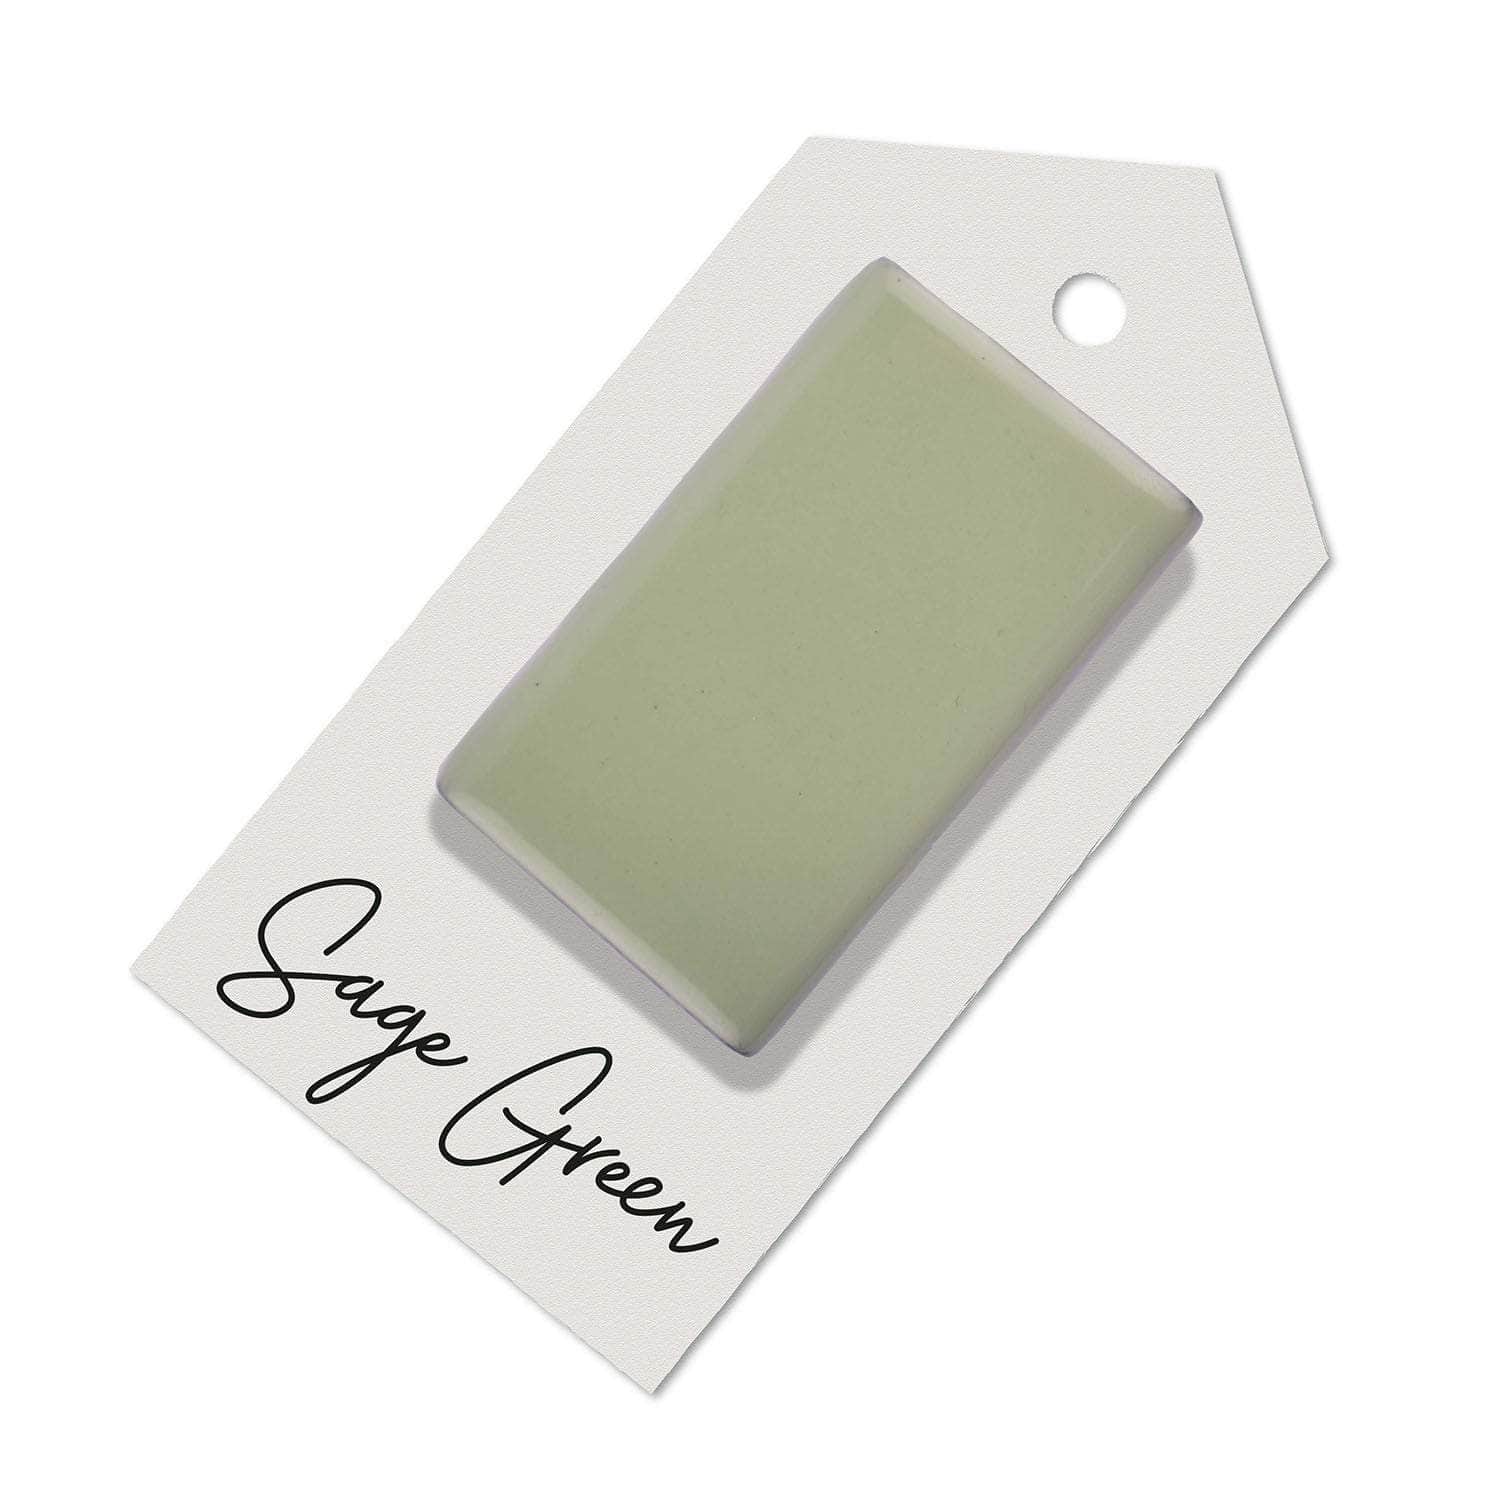 Sage green sample for Aga range cooker re-enamelling & reconditioned cookers